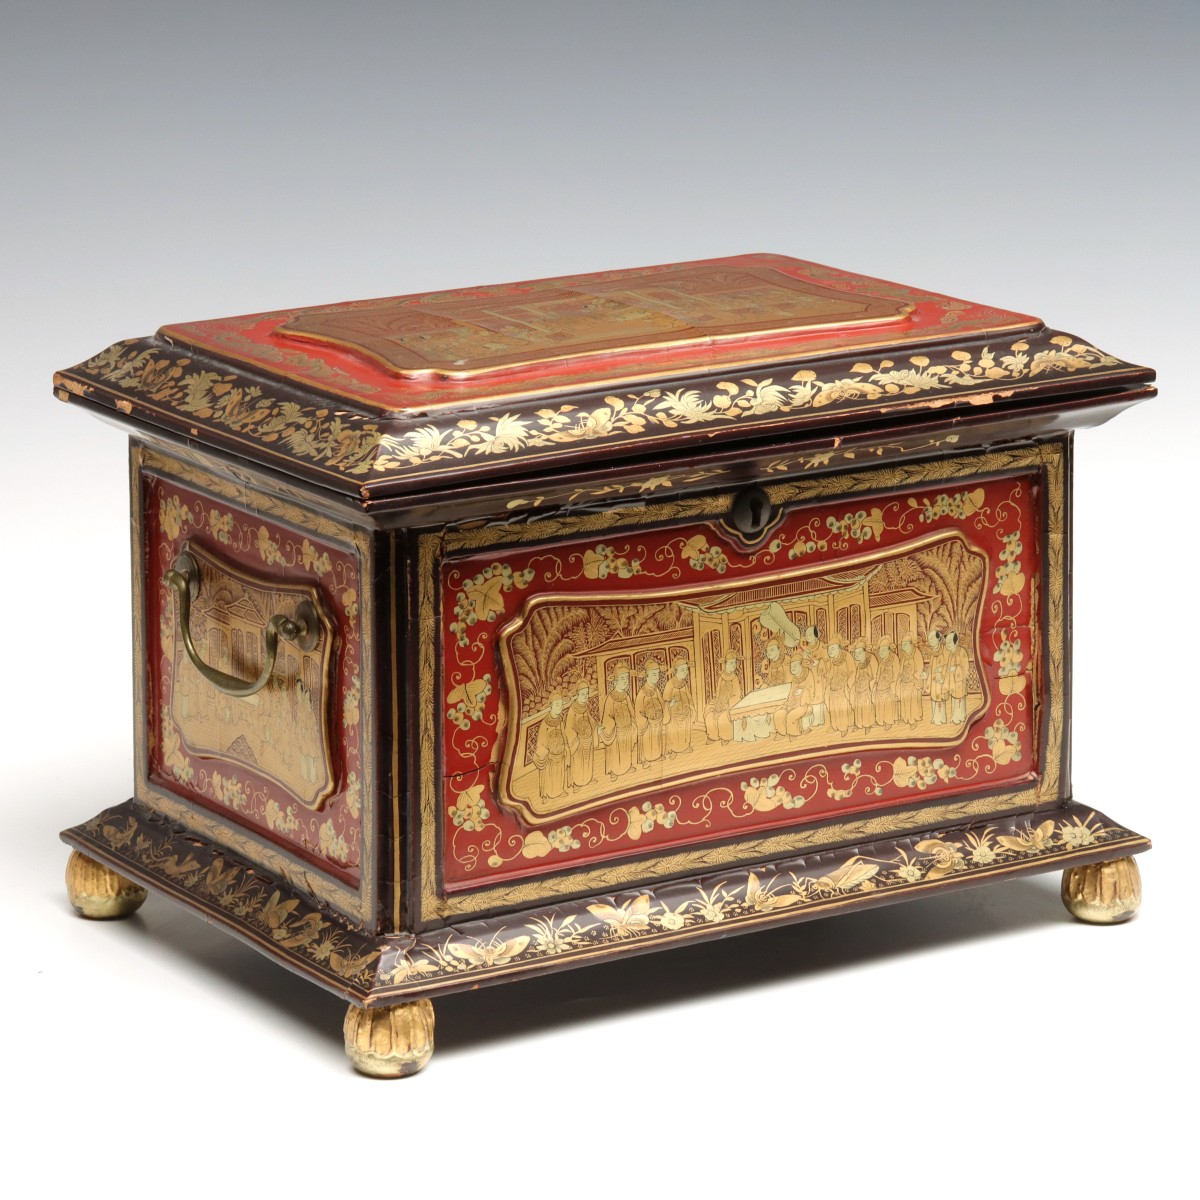 AN ELABORATE ANTIQUE JAPANESE LACQUER JEWELRY CASKET